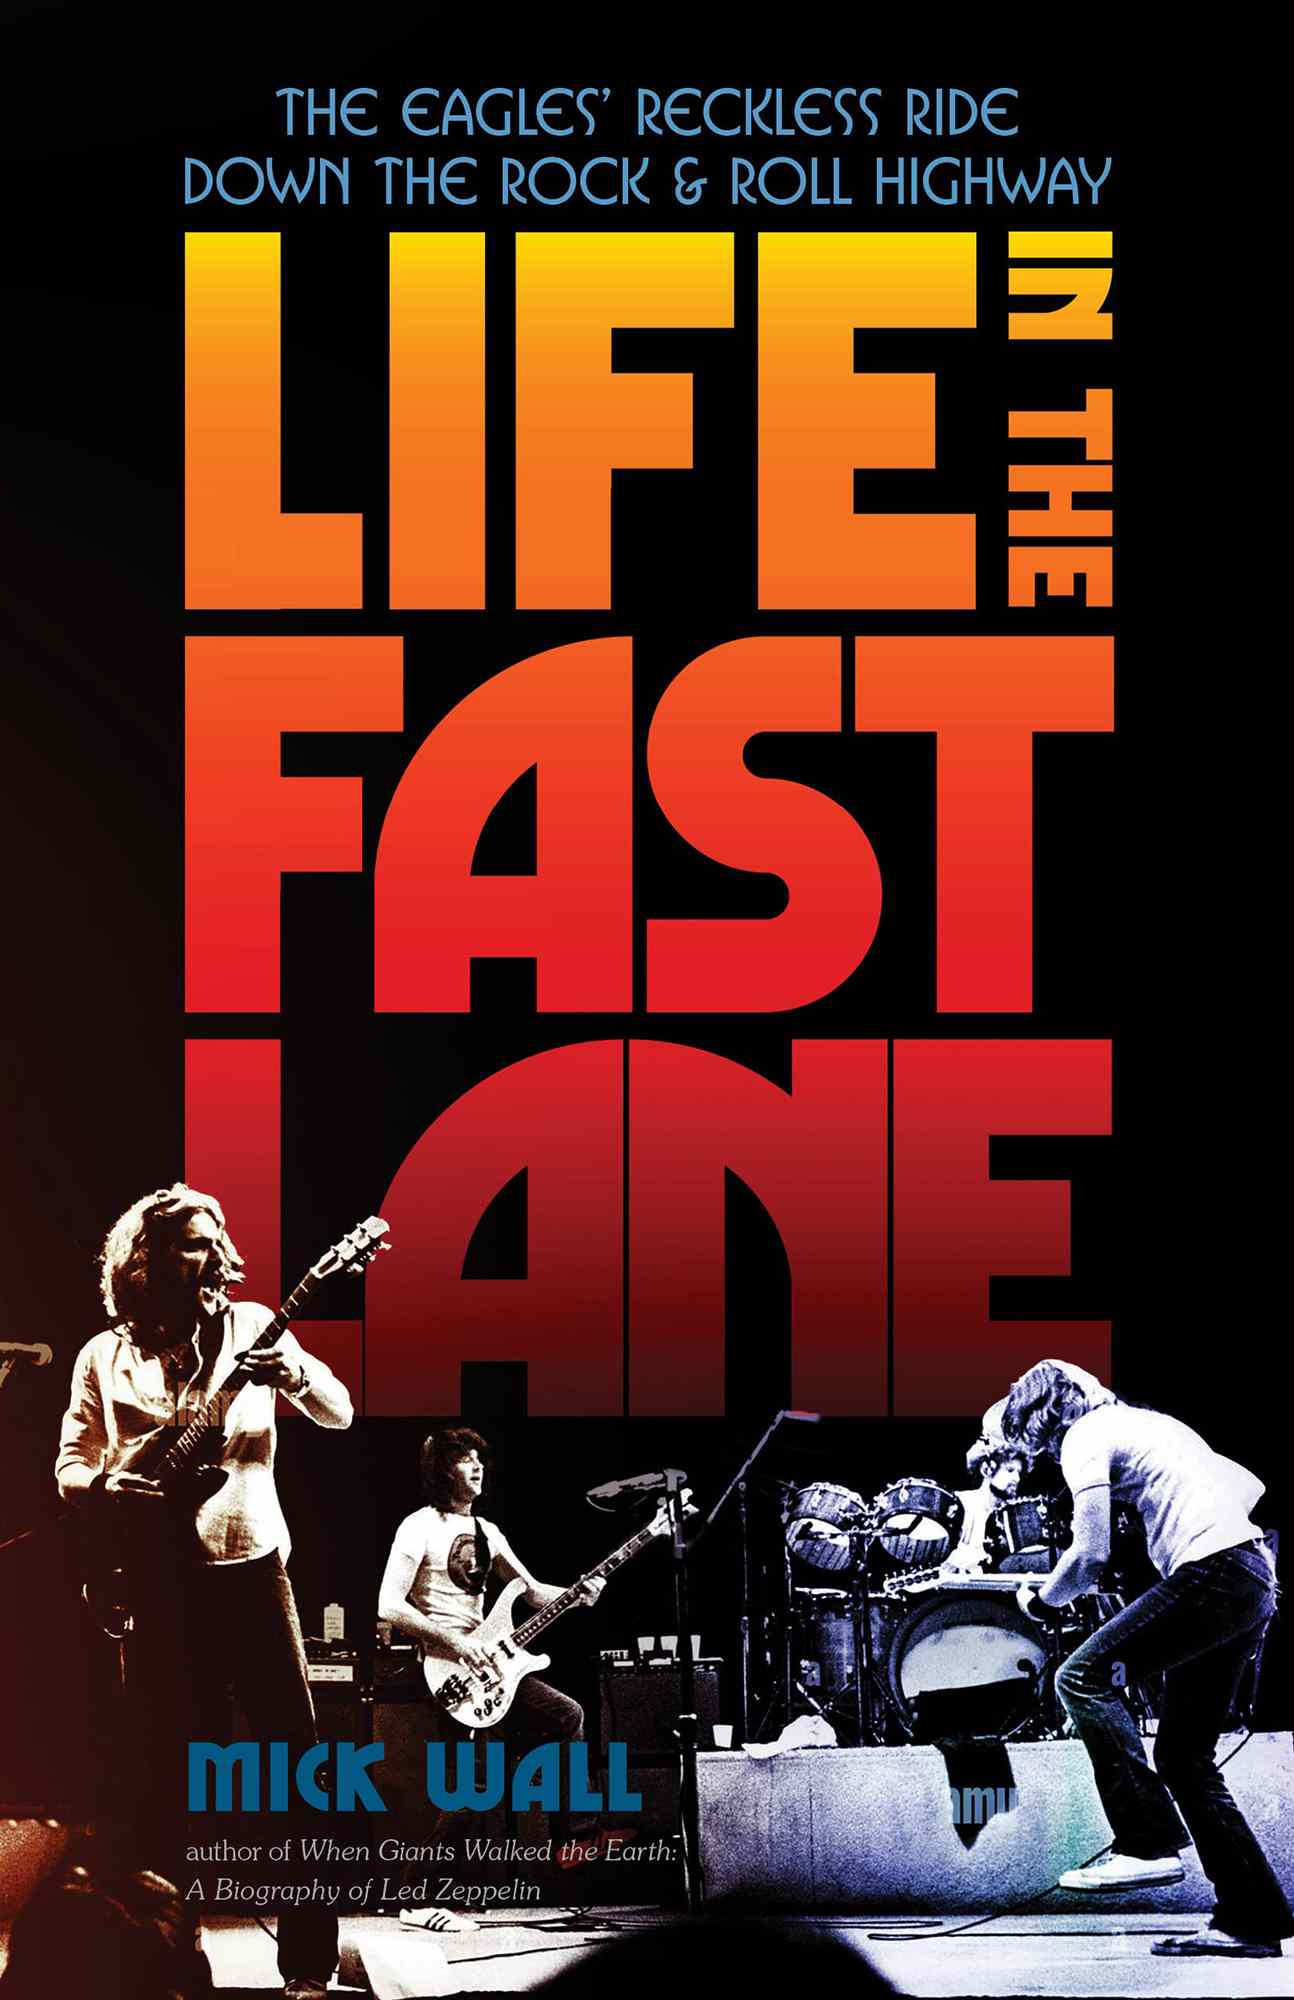 Life in the Fast Lane: The Eagles’ Reckless Ride Down the Rock & Roll Highway Paperback – July 11, 2023 by Mick Wall